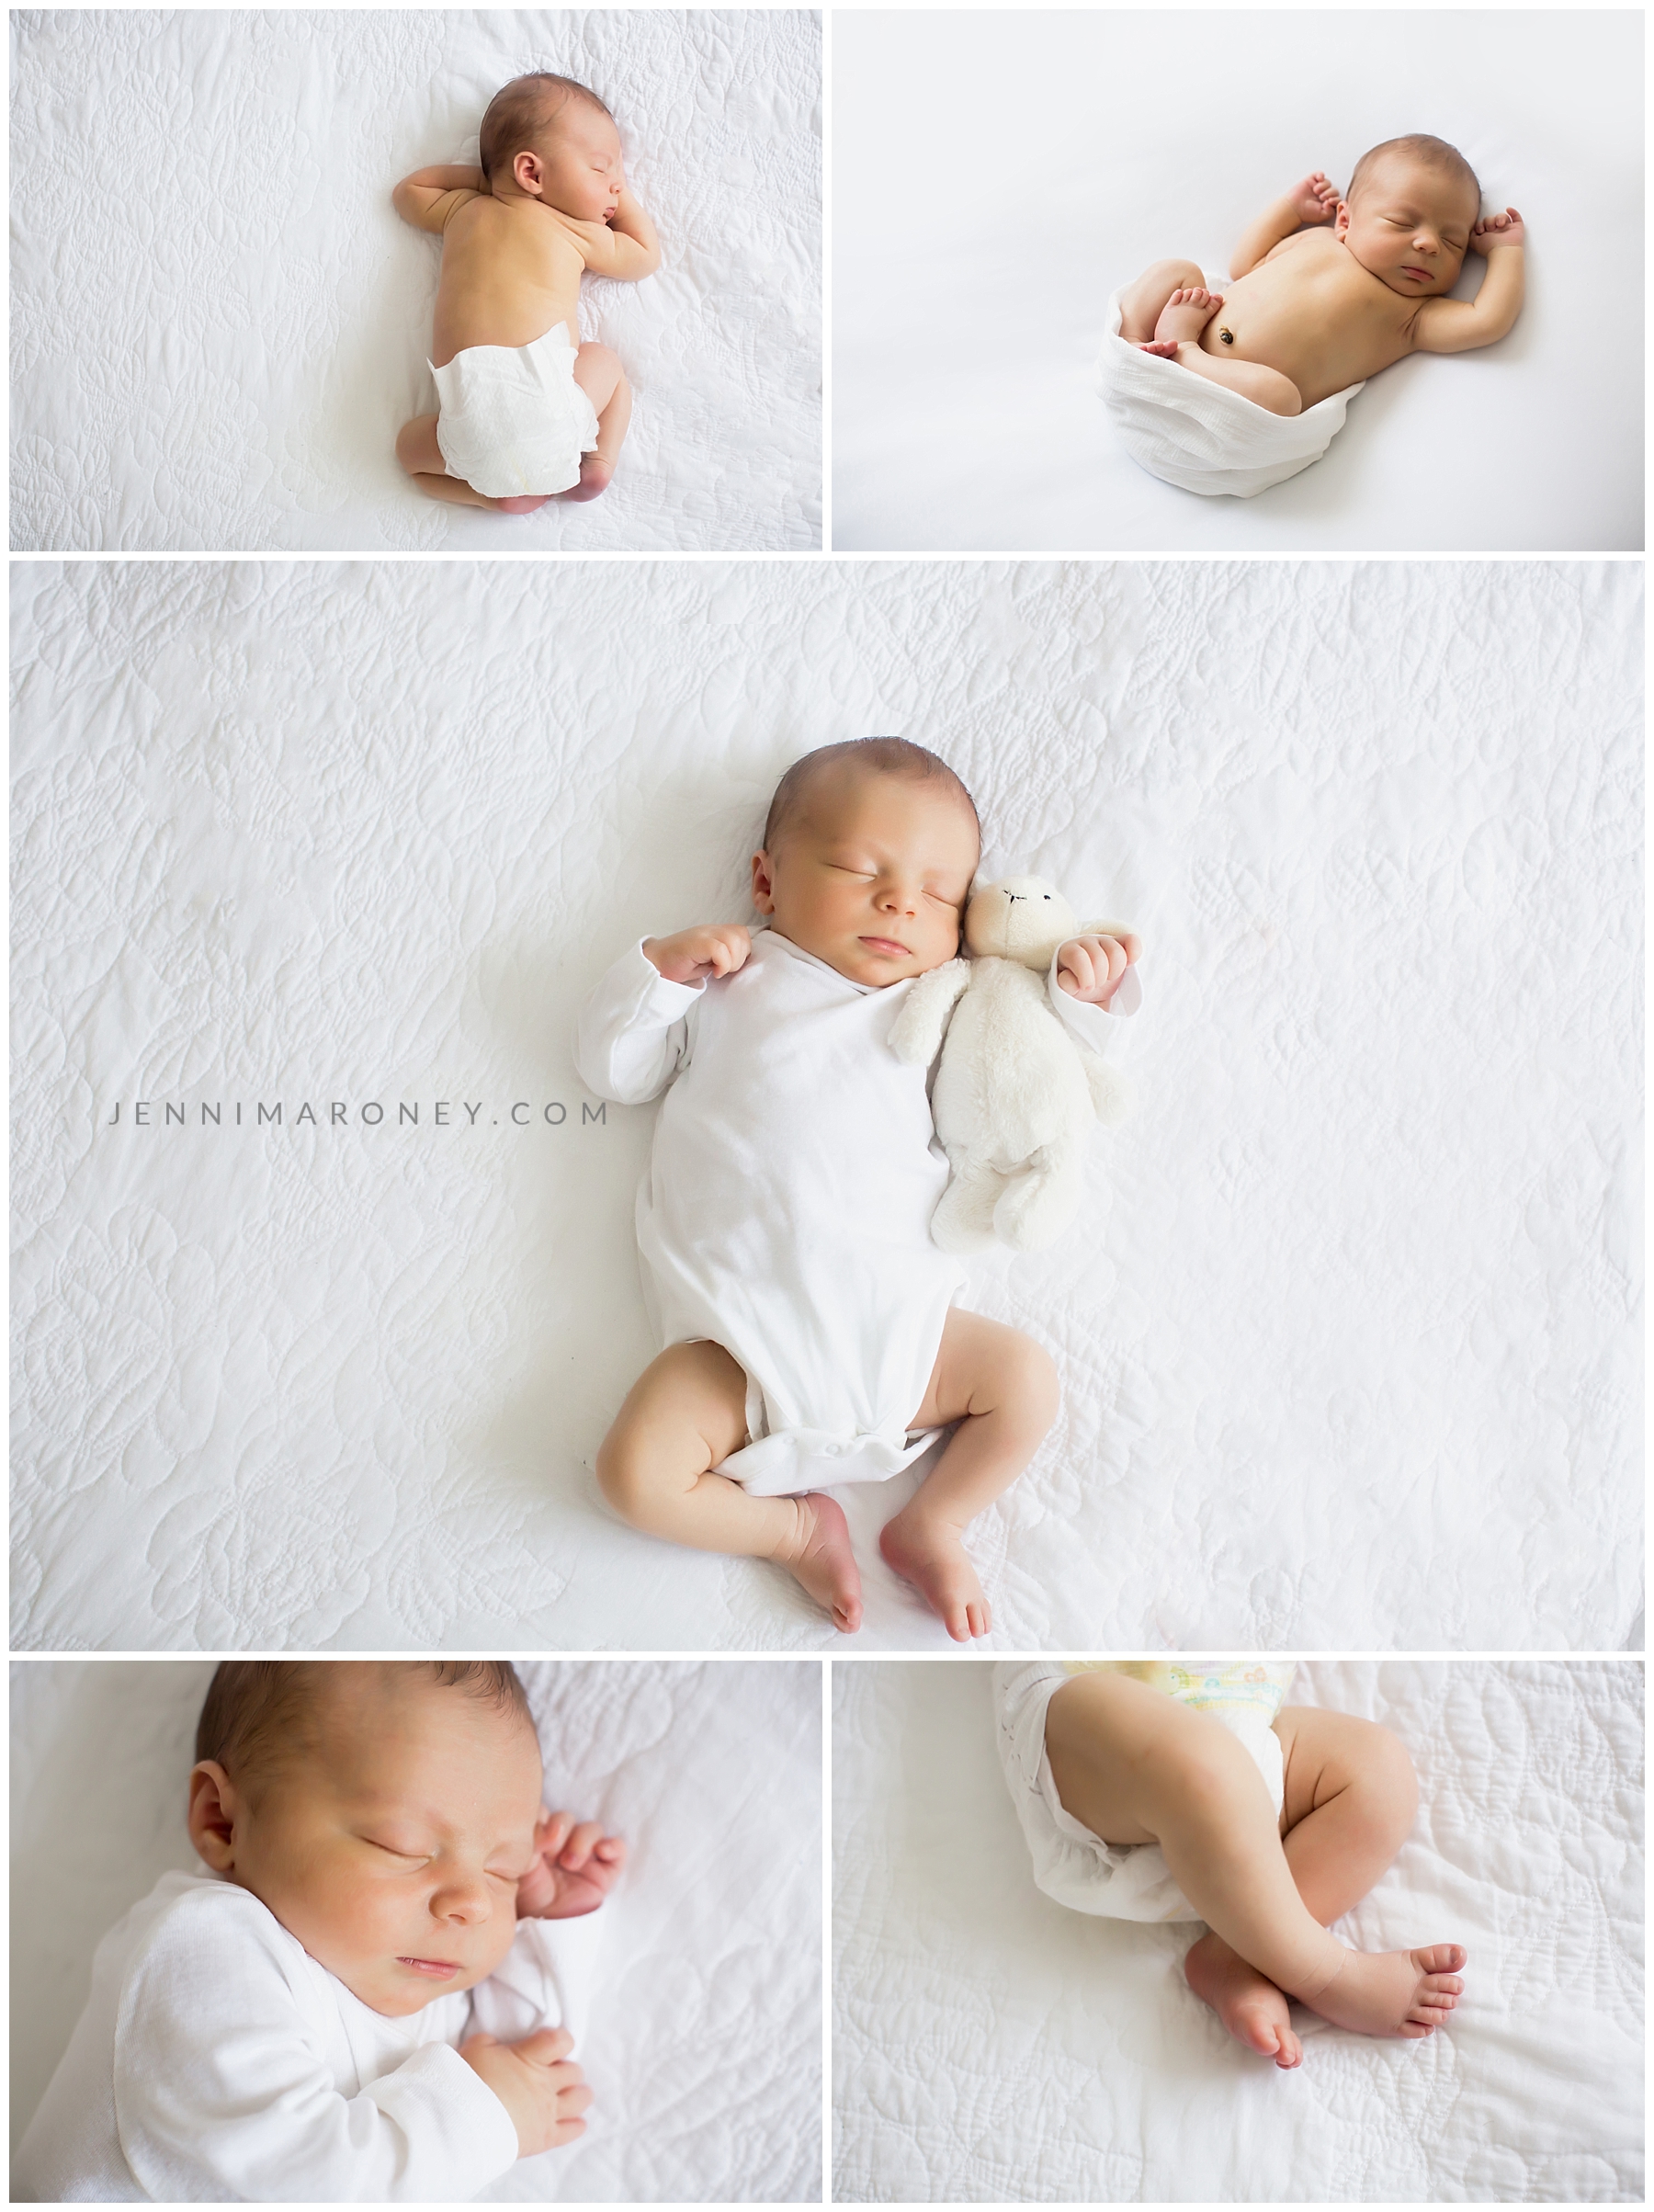 Boulder newborn photographer and boulder newborn photography studio owner, Jenni Maroney specializes in simple, natural newborn photography.